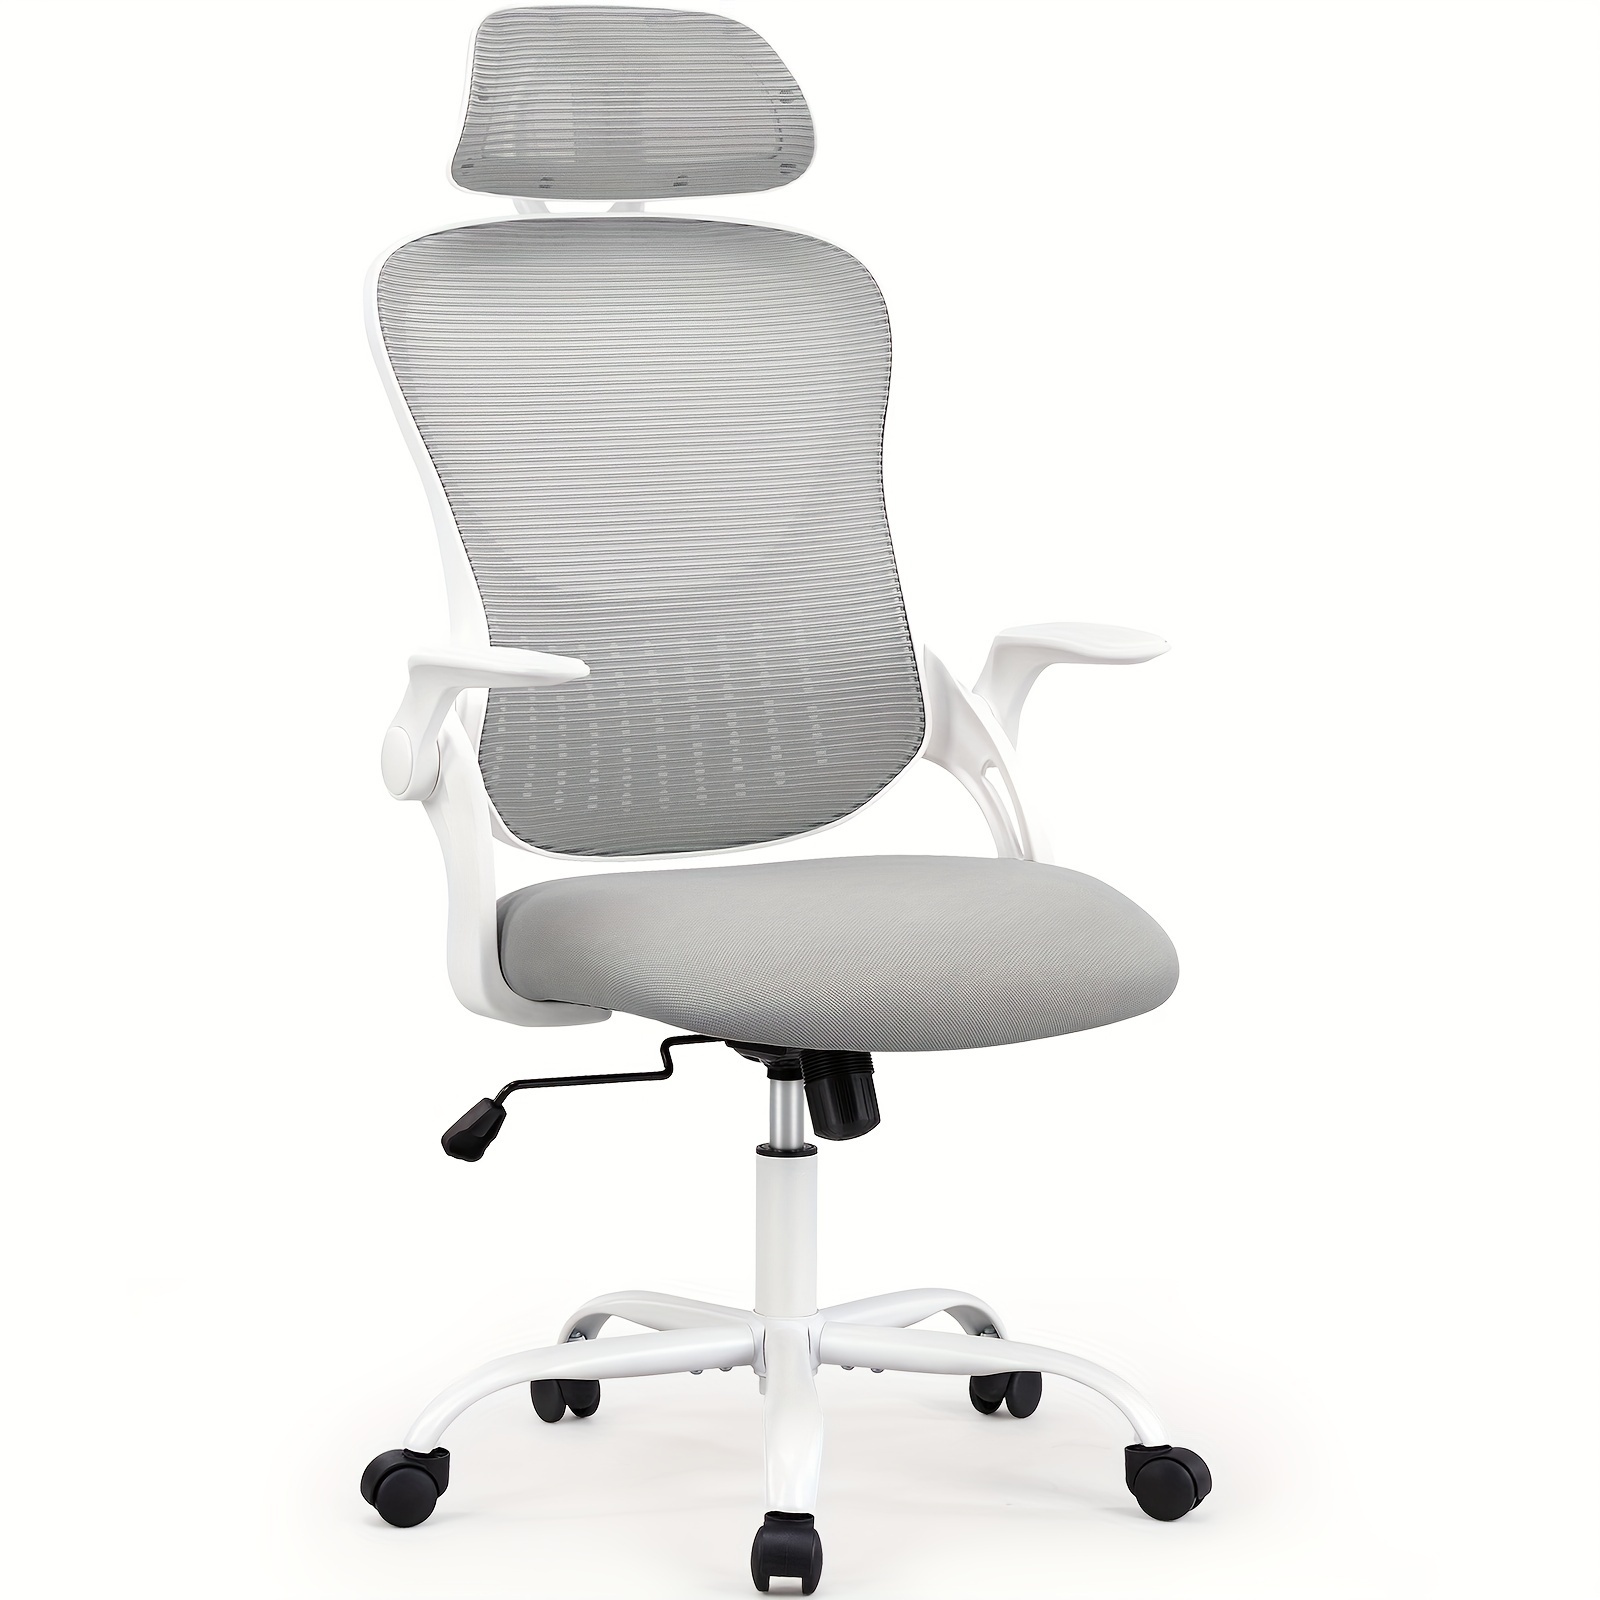 

Ergonomic Office Chair With Flip-up Arms And Adjustable Headrest, Mesh Computer Desk Chair With Wheels Work Chair For Home Office, Grey